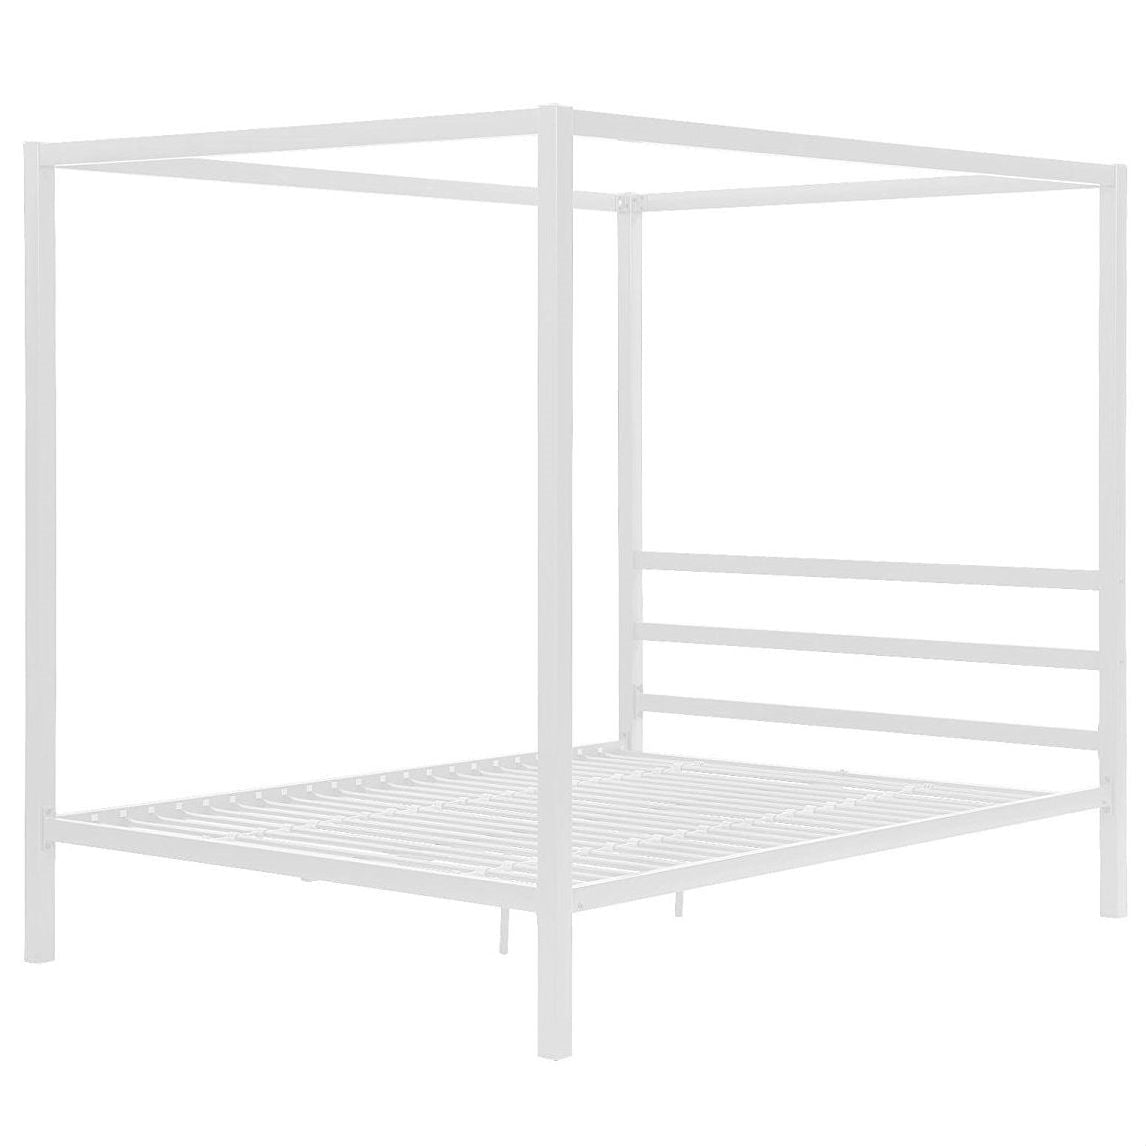 Bedroom > Bed Frames > Canopy Beds - Queen Size Sturdy Metal Canopy Bed Frame In White Finish